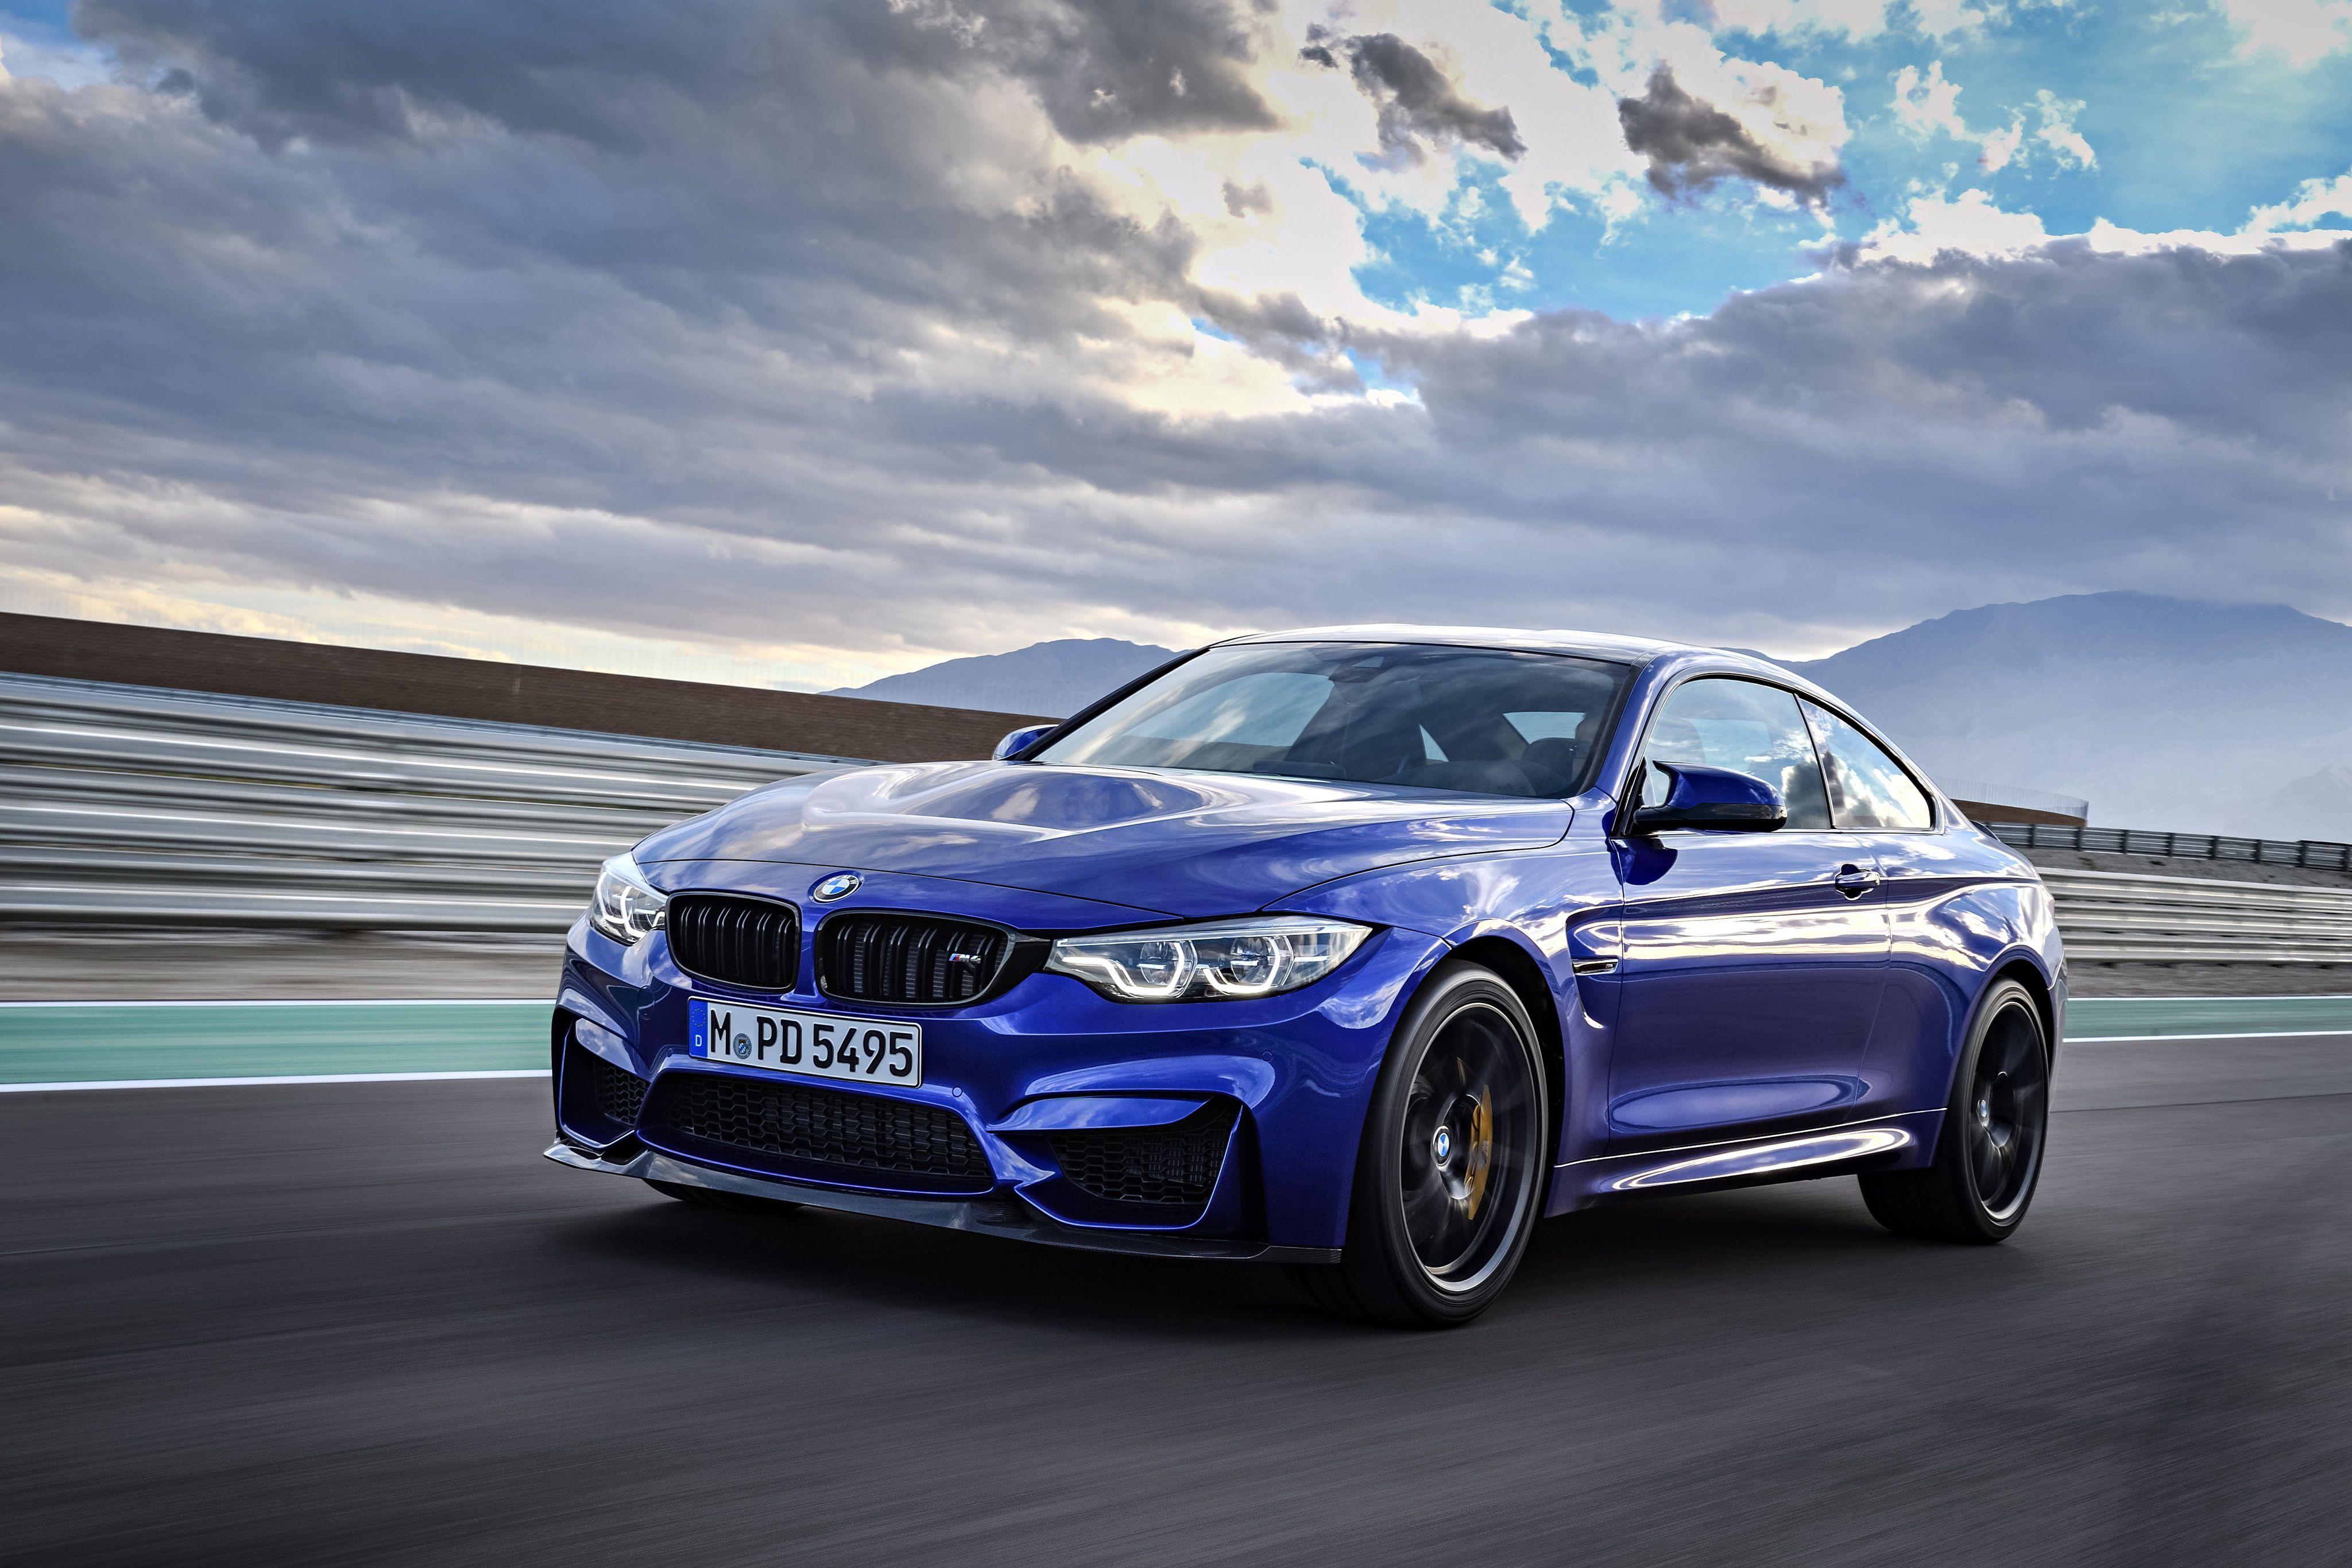 19+ 2020 Bmw M4 Competition Yas Marina Blue Wallpaper free download